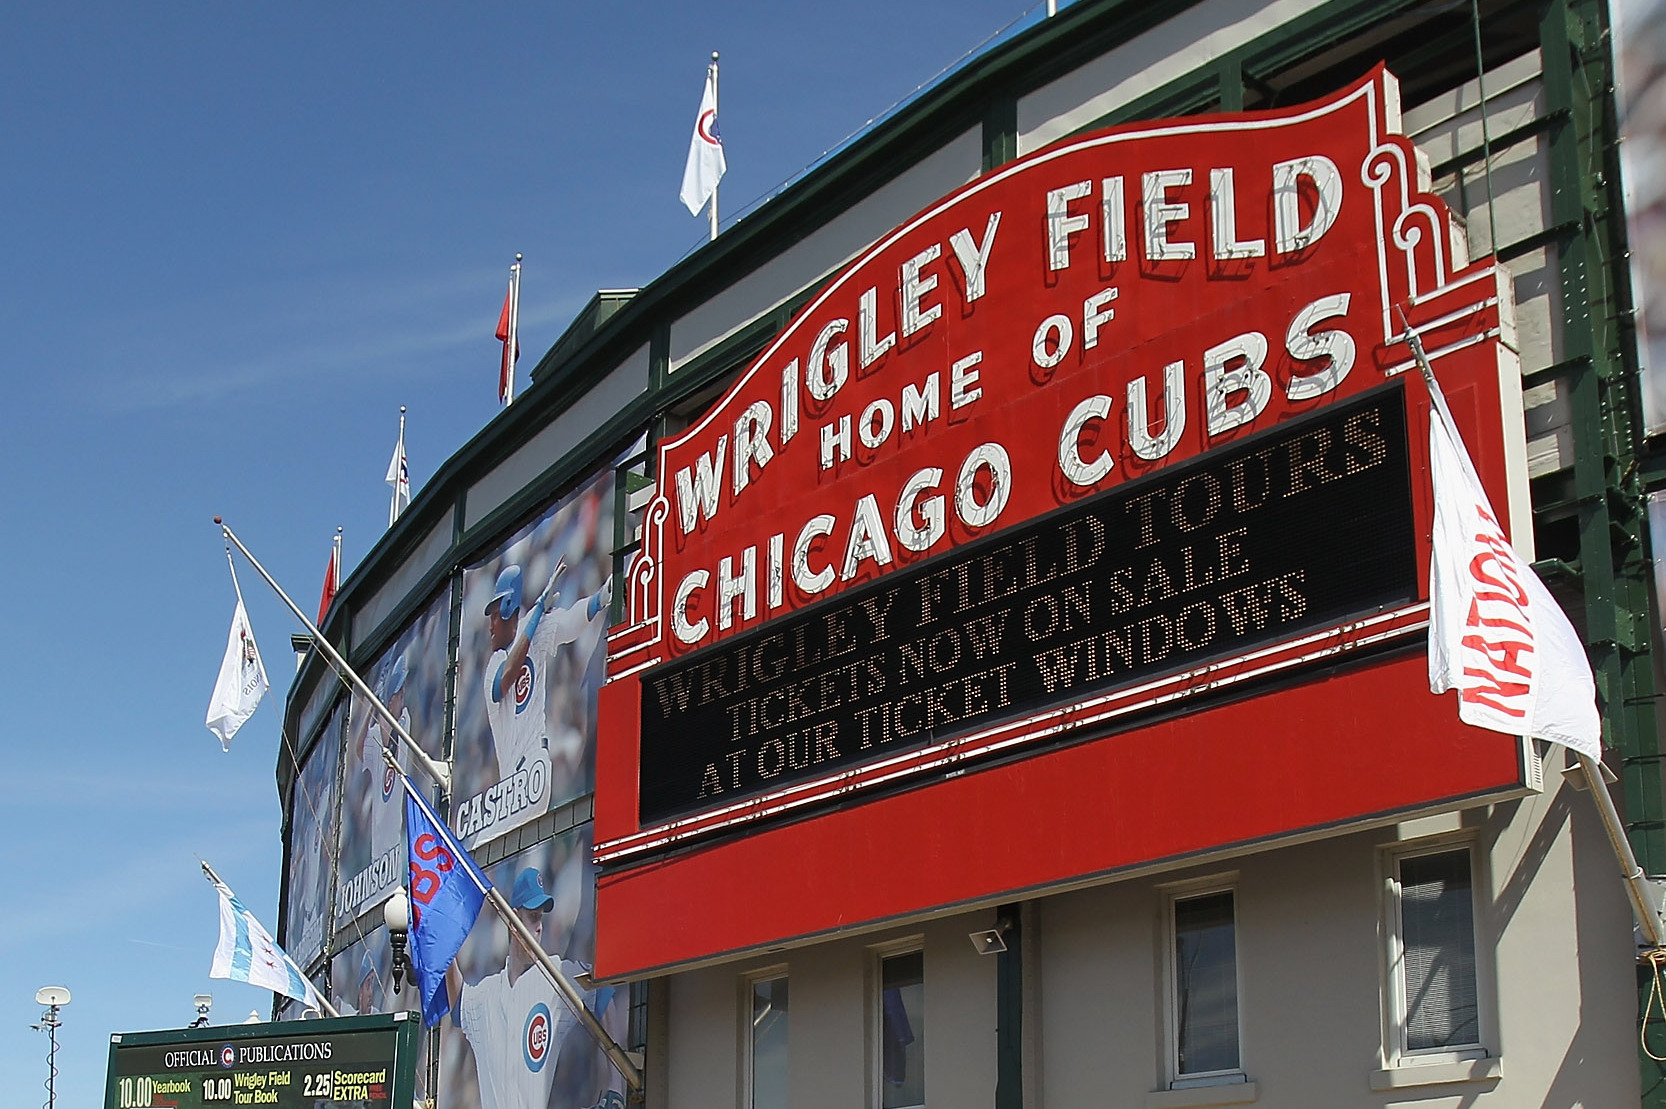 wrigley field seating map - Google Search  Wrigley field, Wrigley field  stadium, Cubs tickets